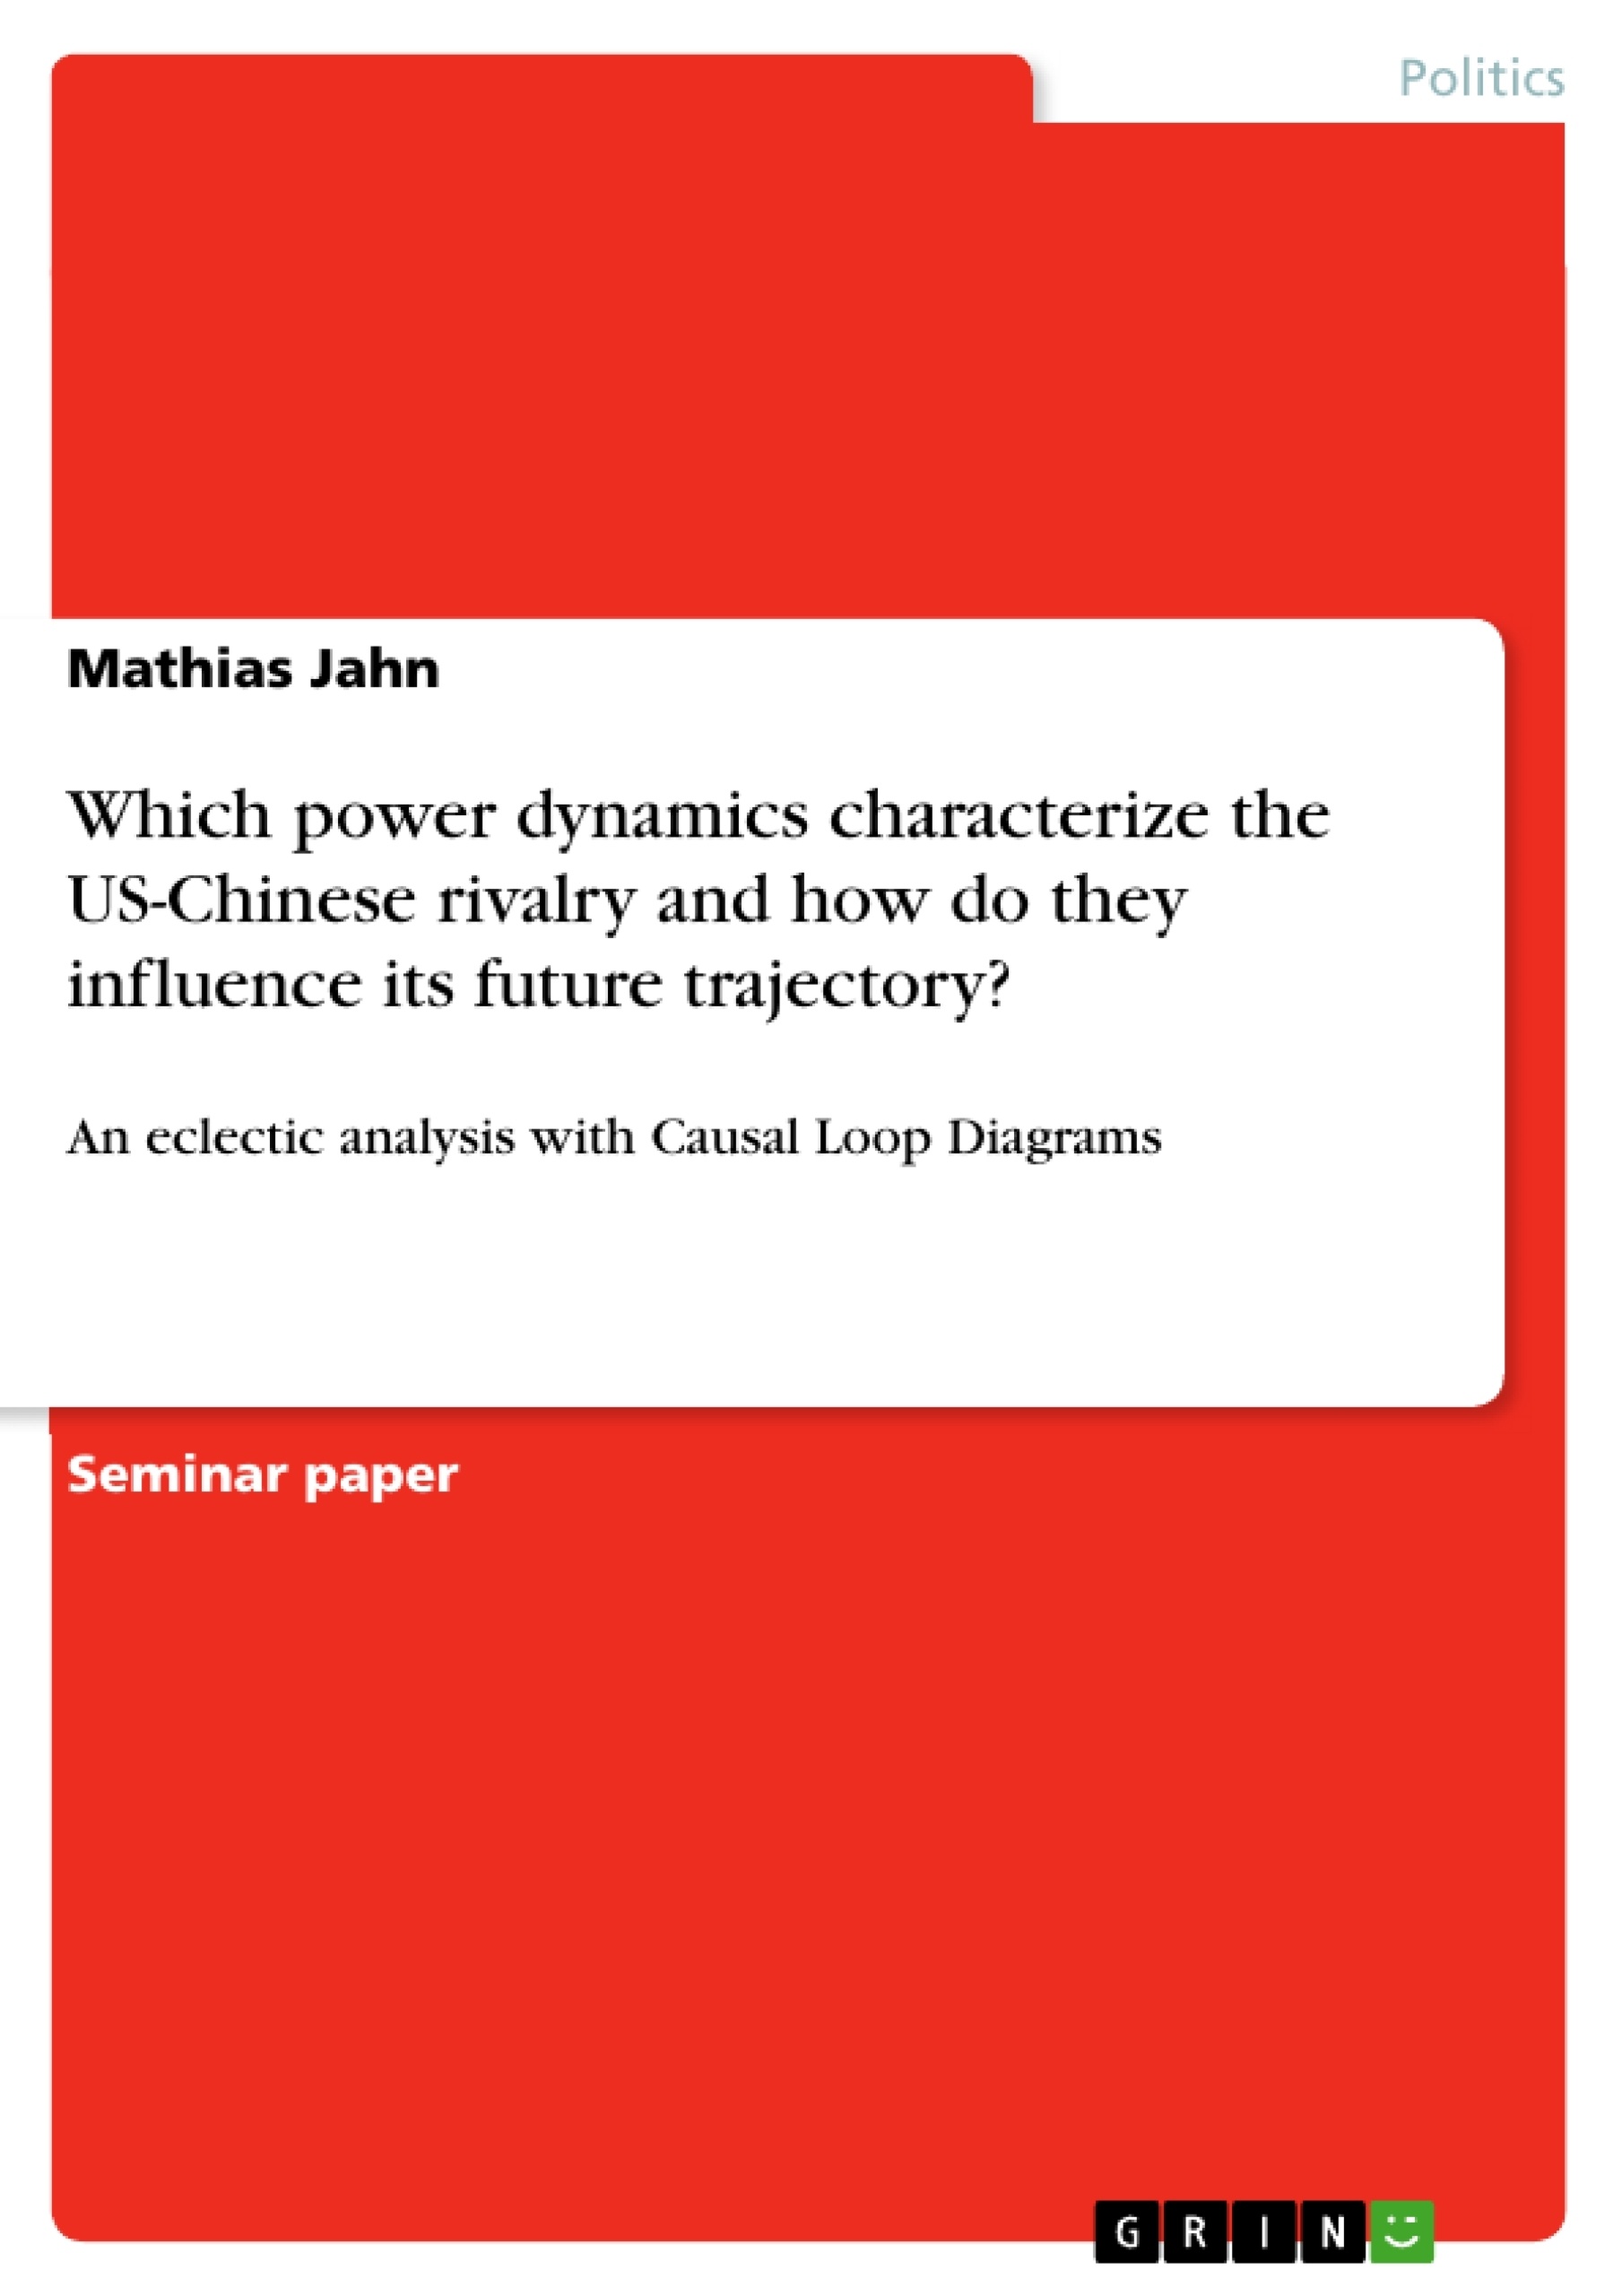 Título: Which power dynamics characterize the US-Chinese rivalry and how do they influence its future trajectory?